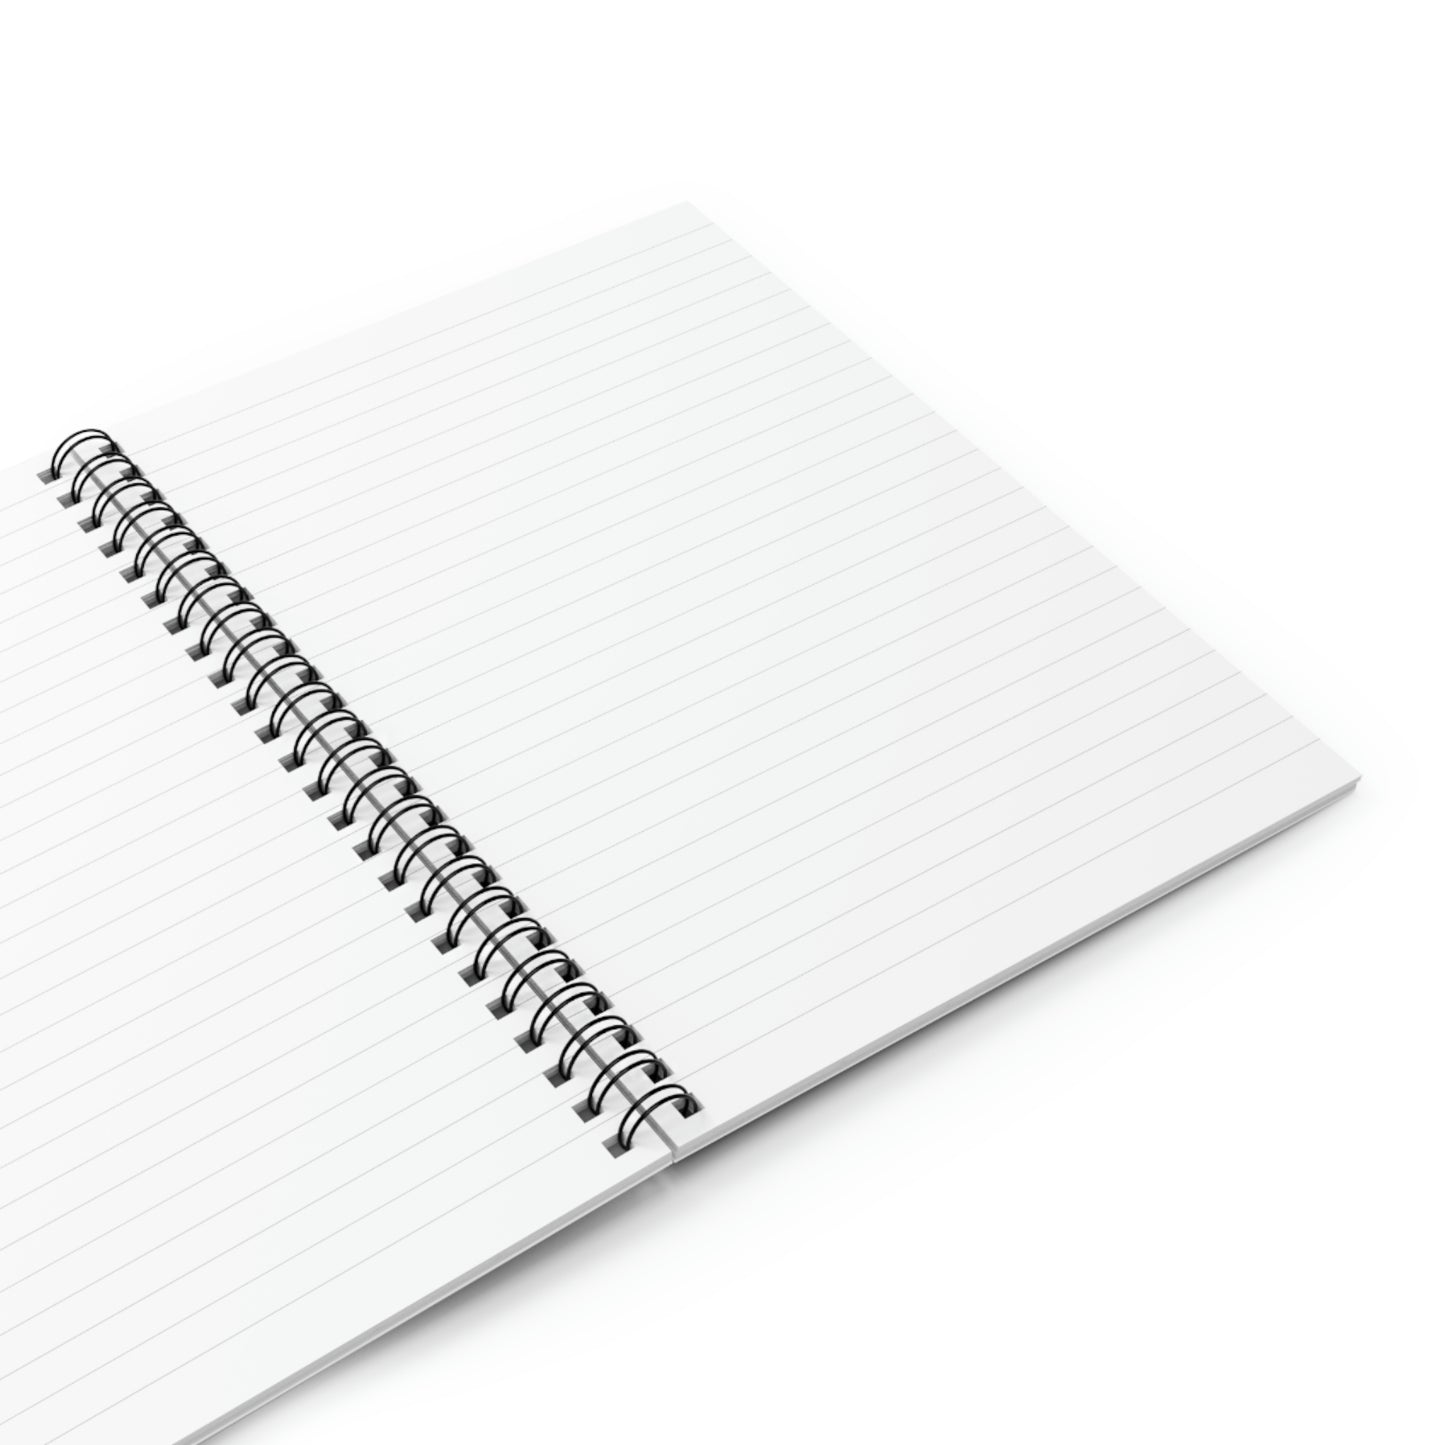 Daily Affirmations Spiral Notebook - Ruled Line